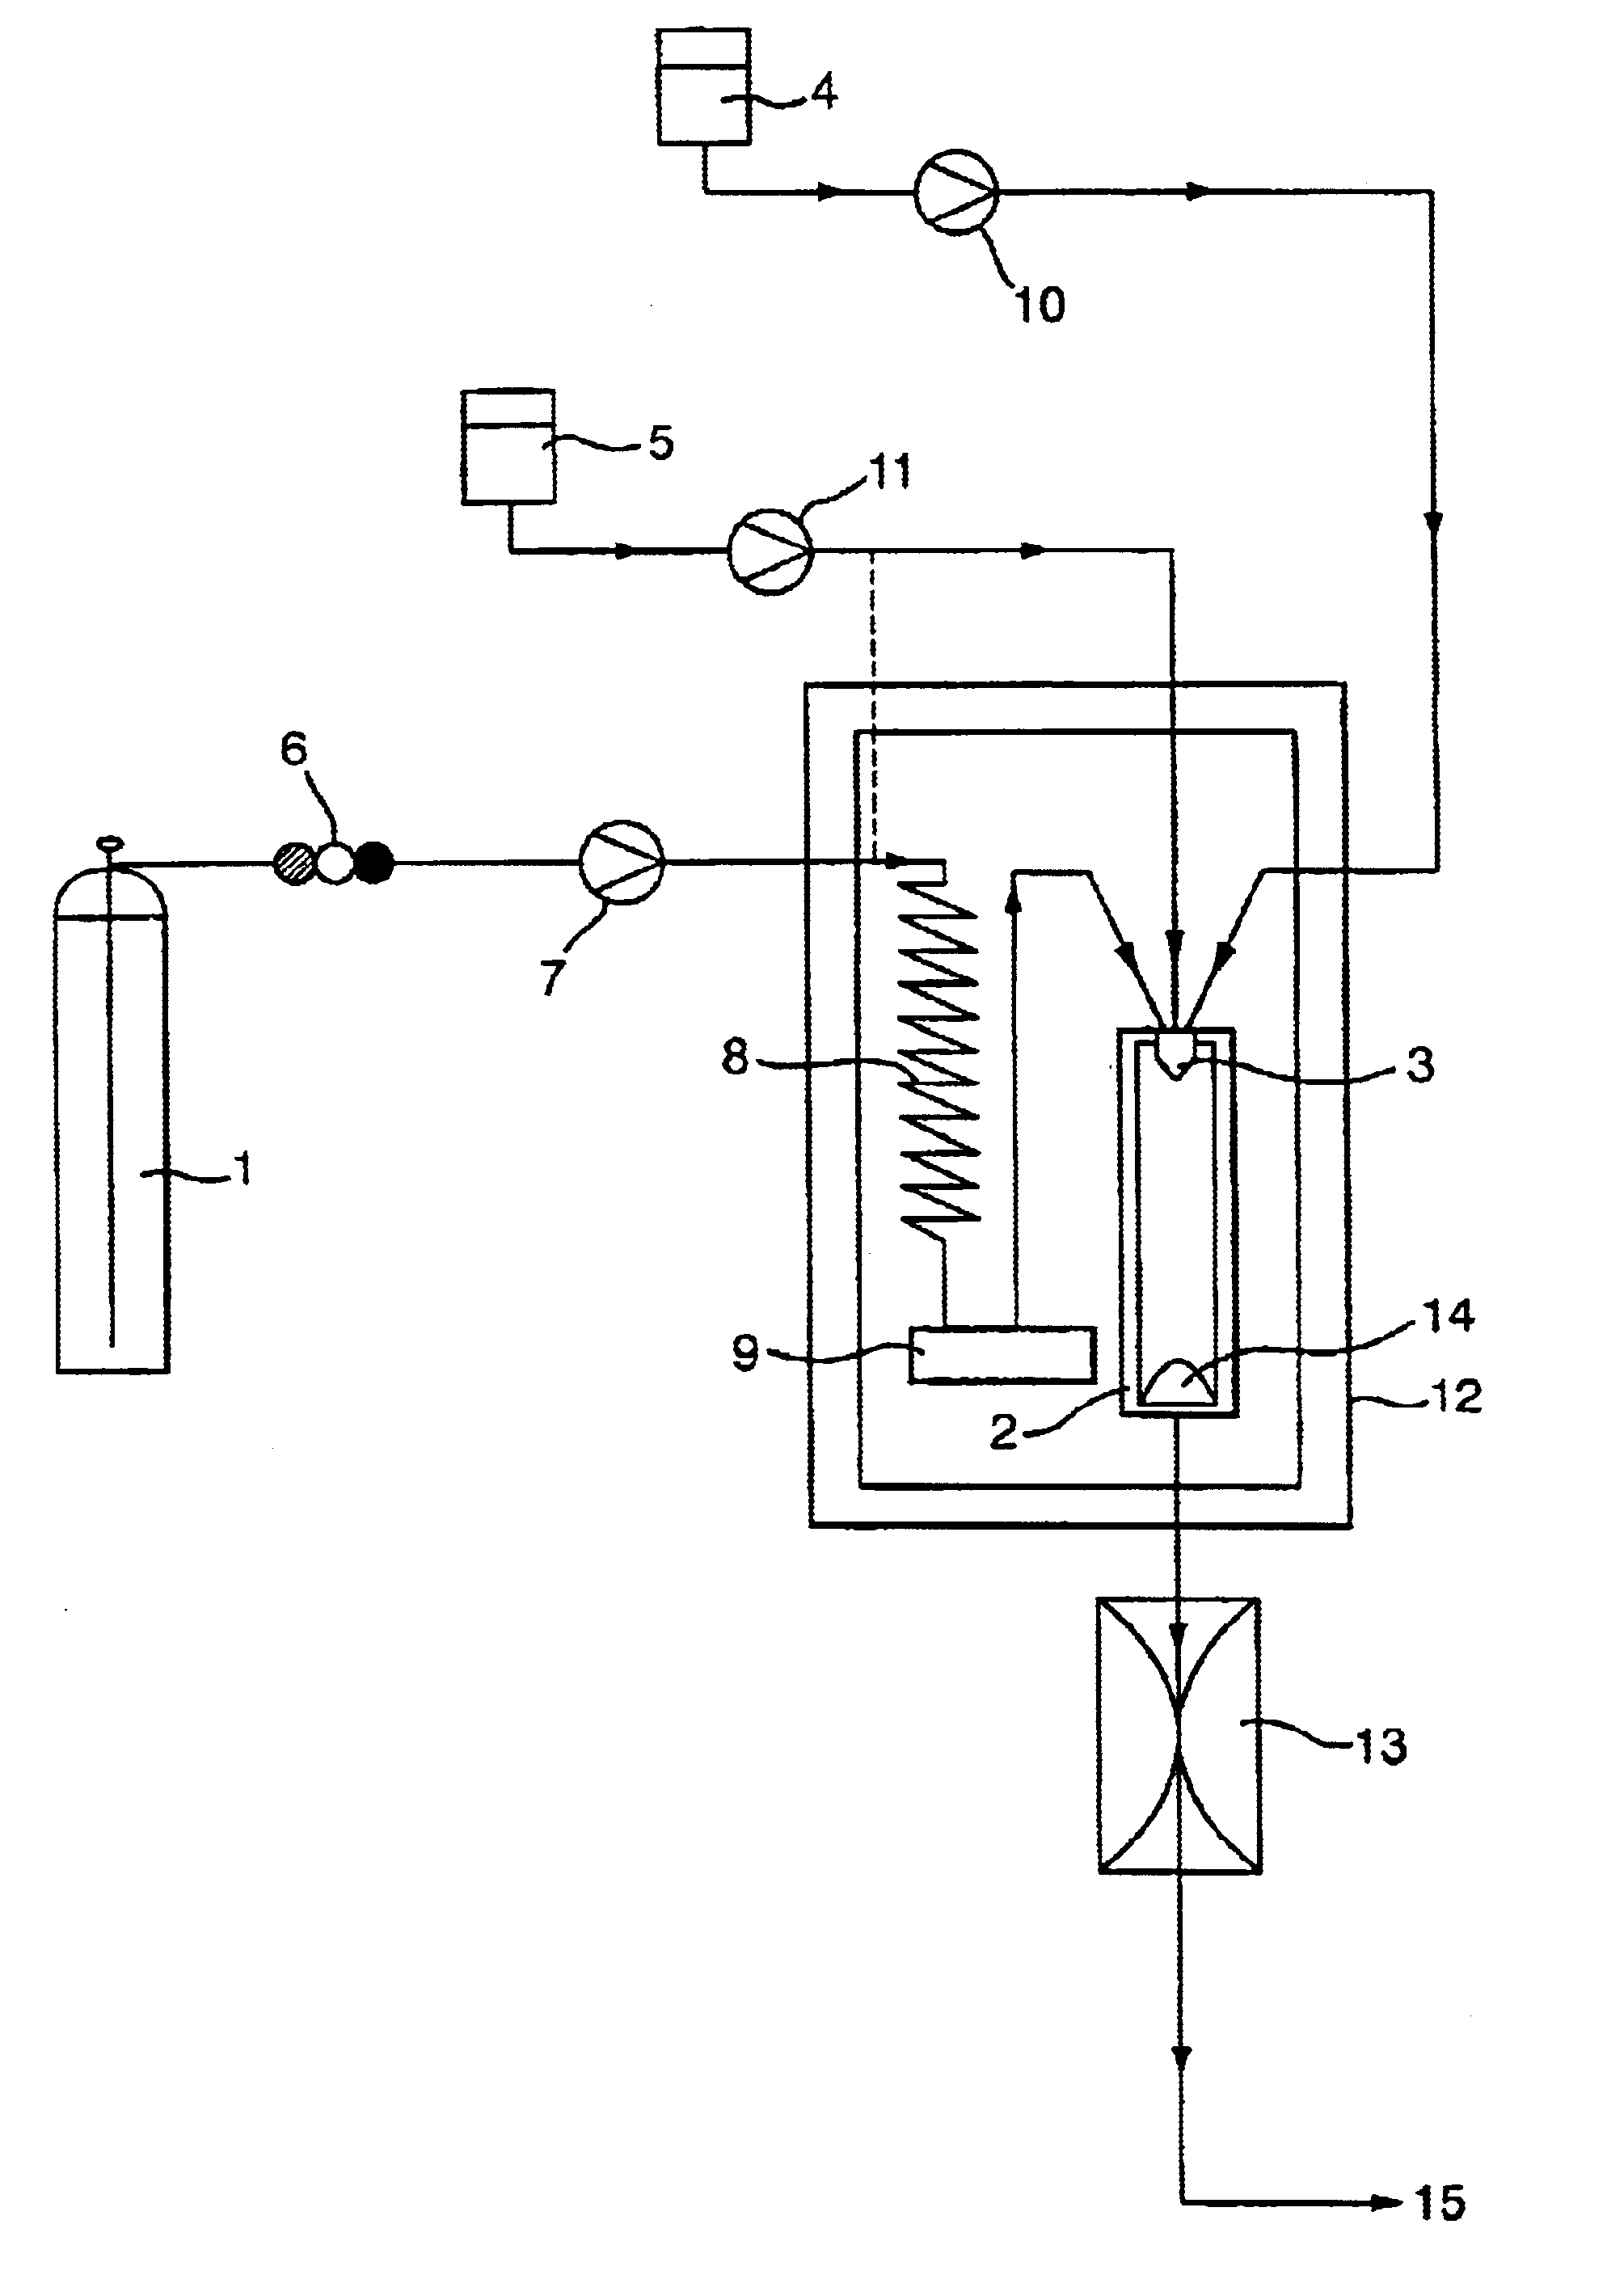 Method of particle formation